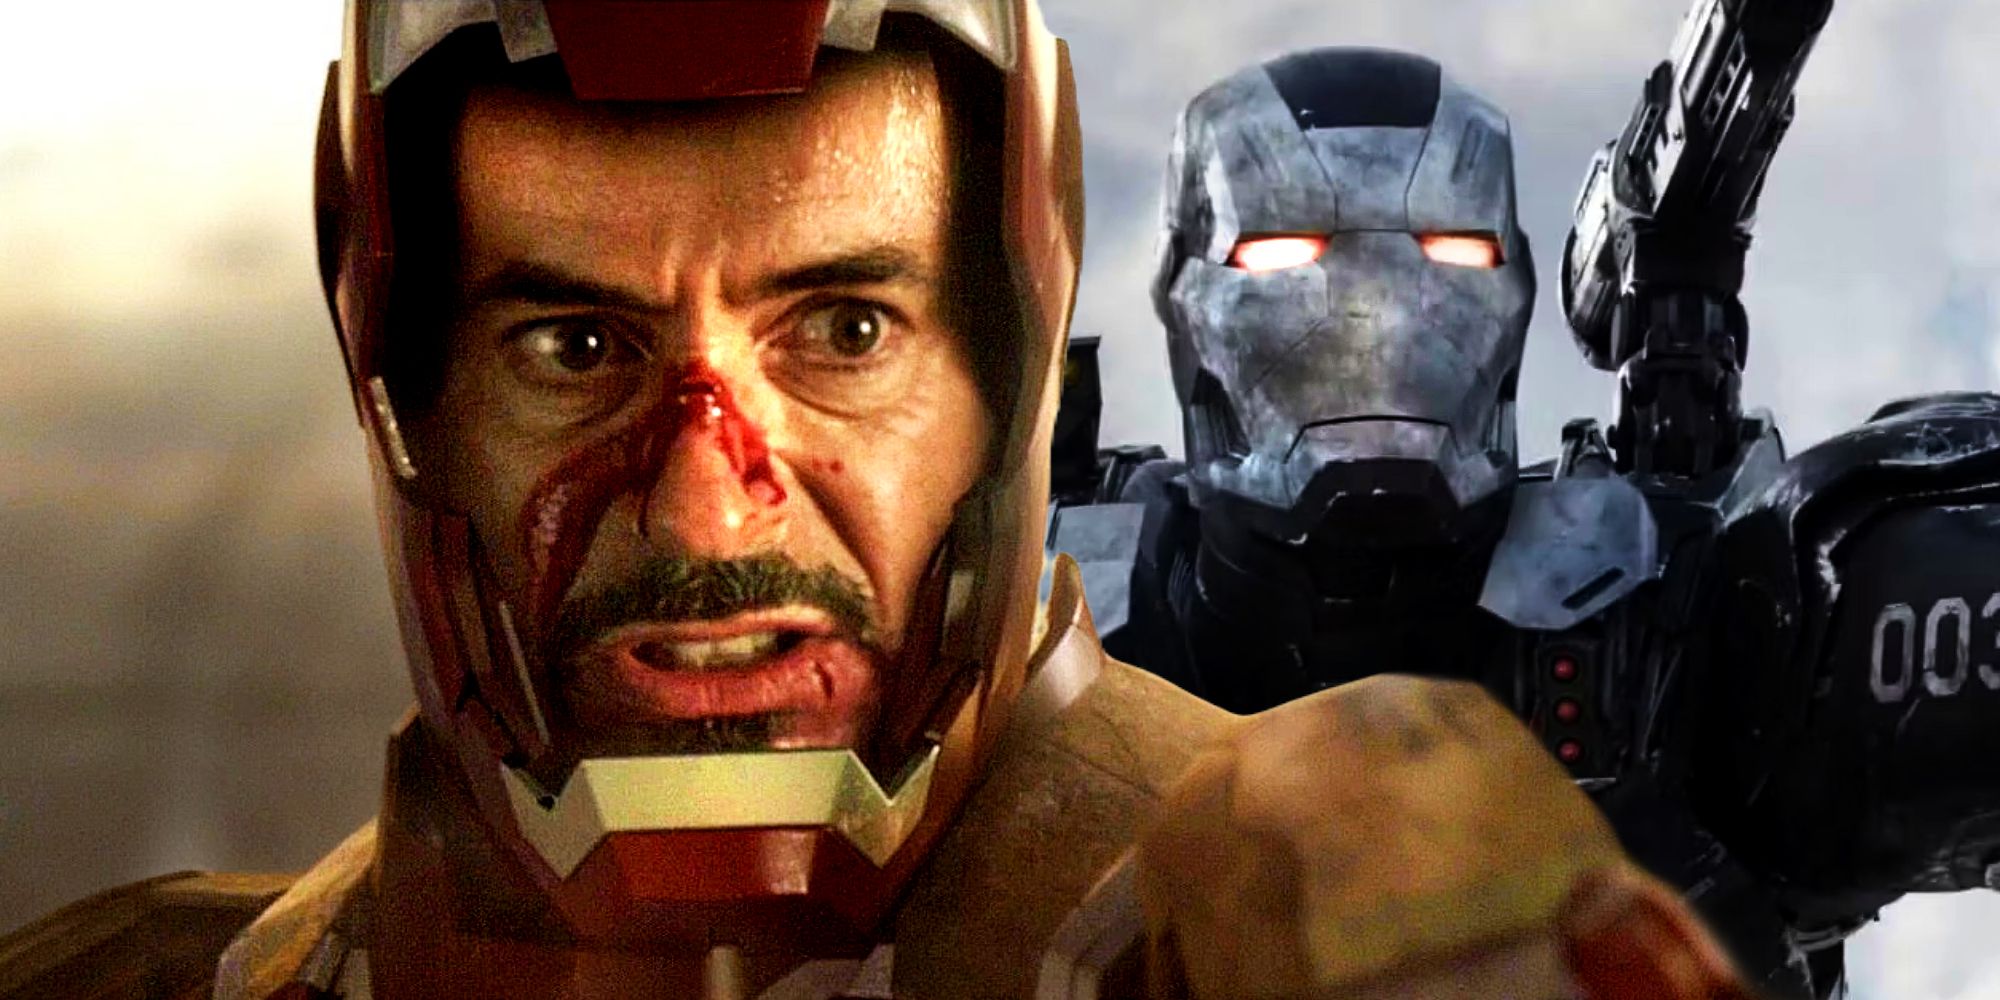 Tony Stark Suits Up in Iron Man 3 and War Machine Flies in Captain America Civil War